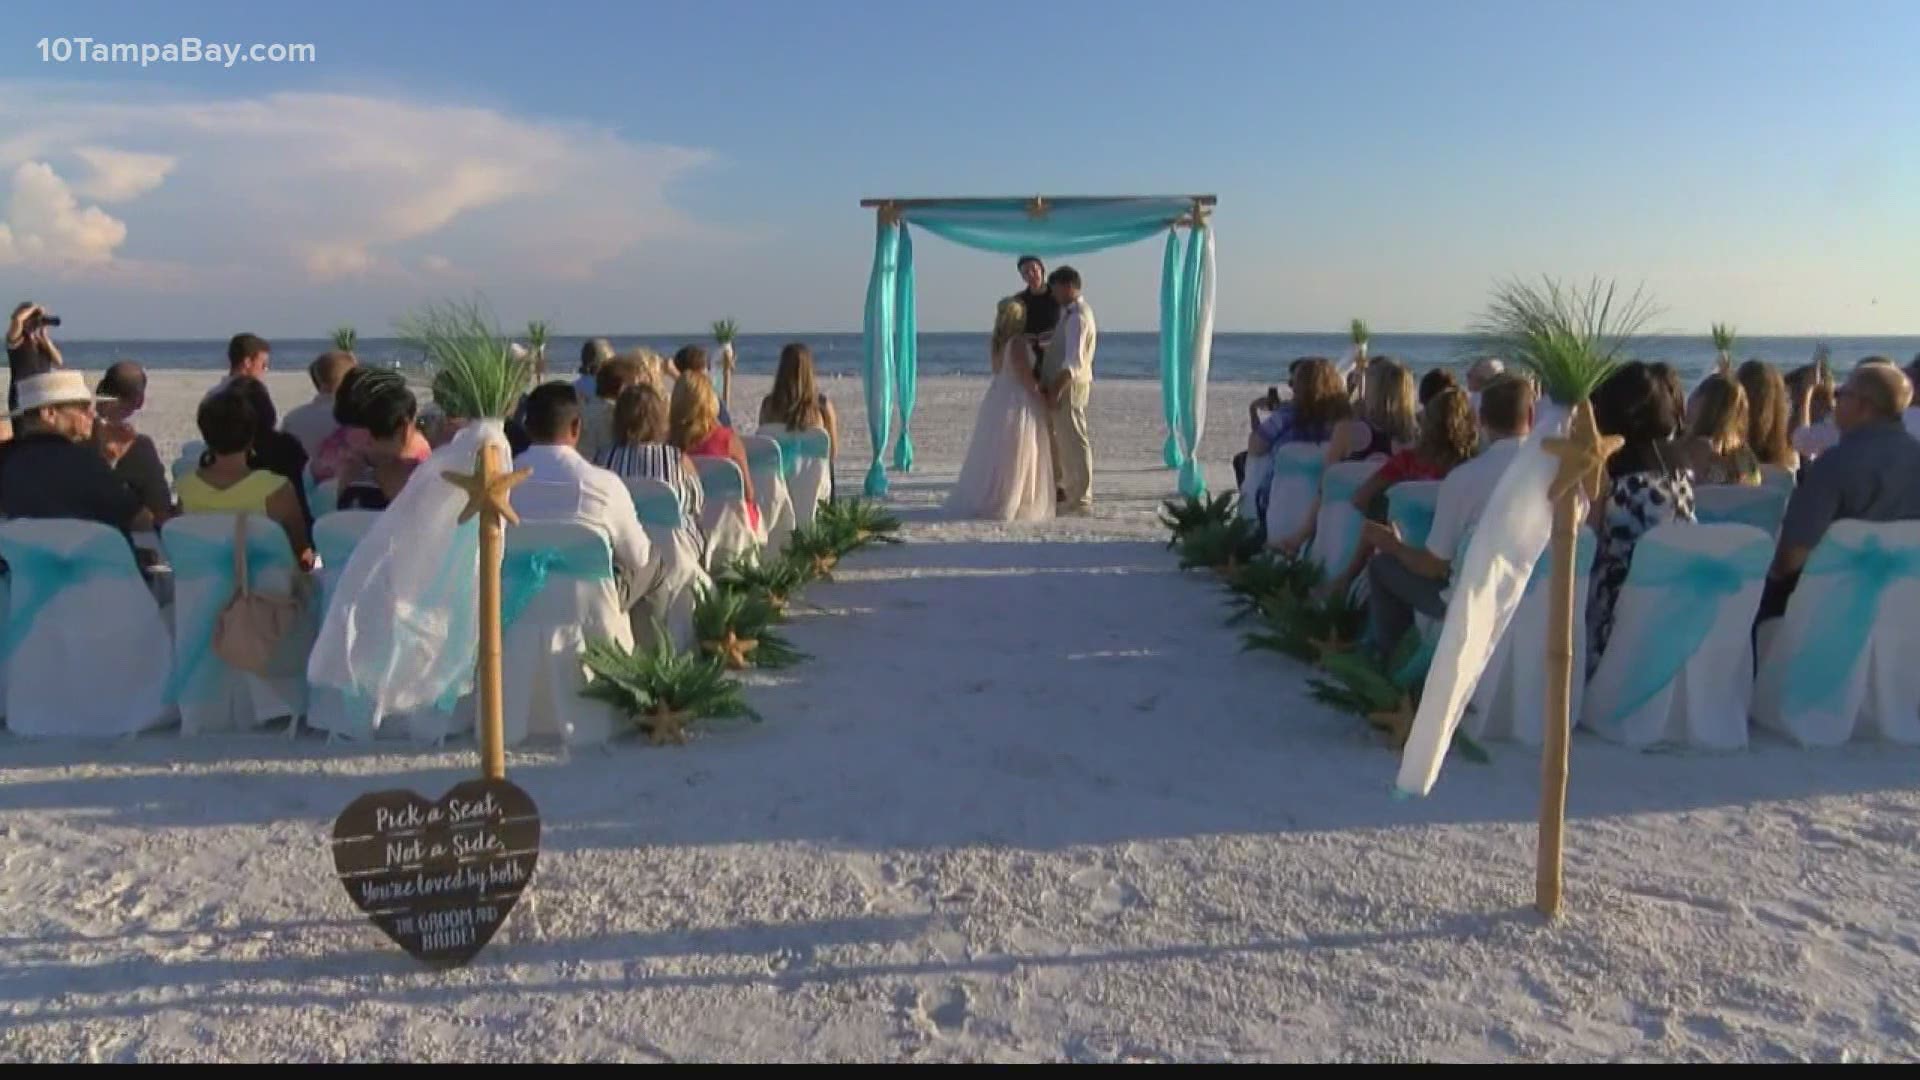 Event and travel restrictions in other states are driving many couples to host destination weddings in Tampa Bay.